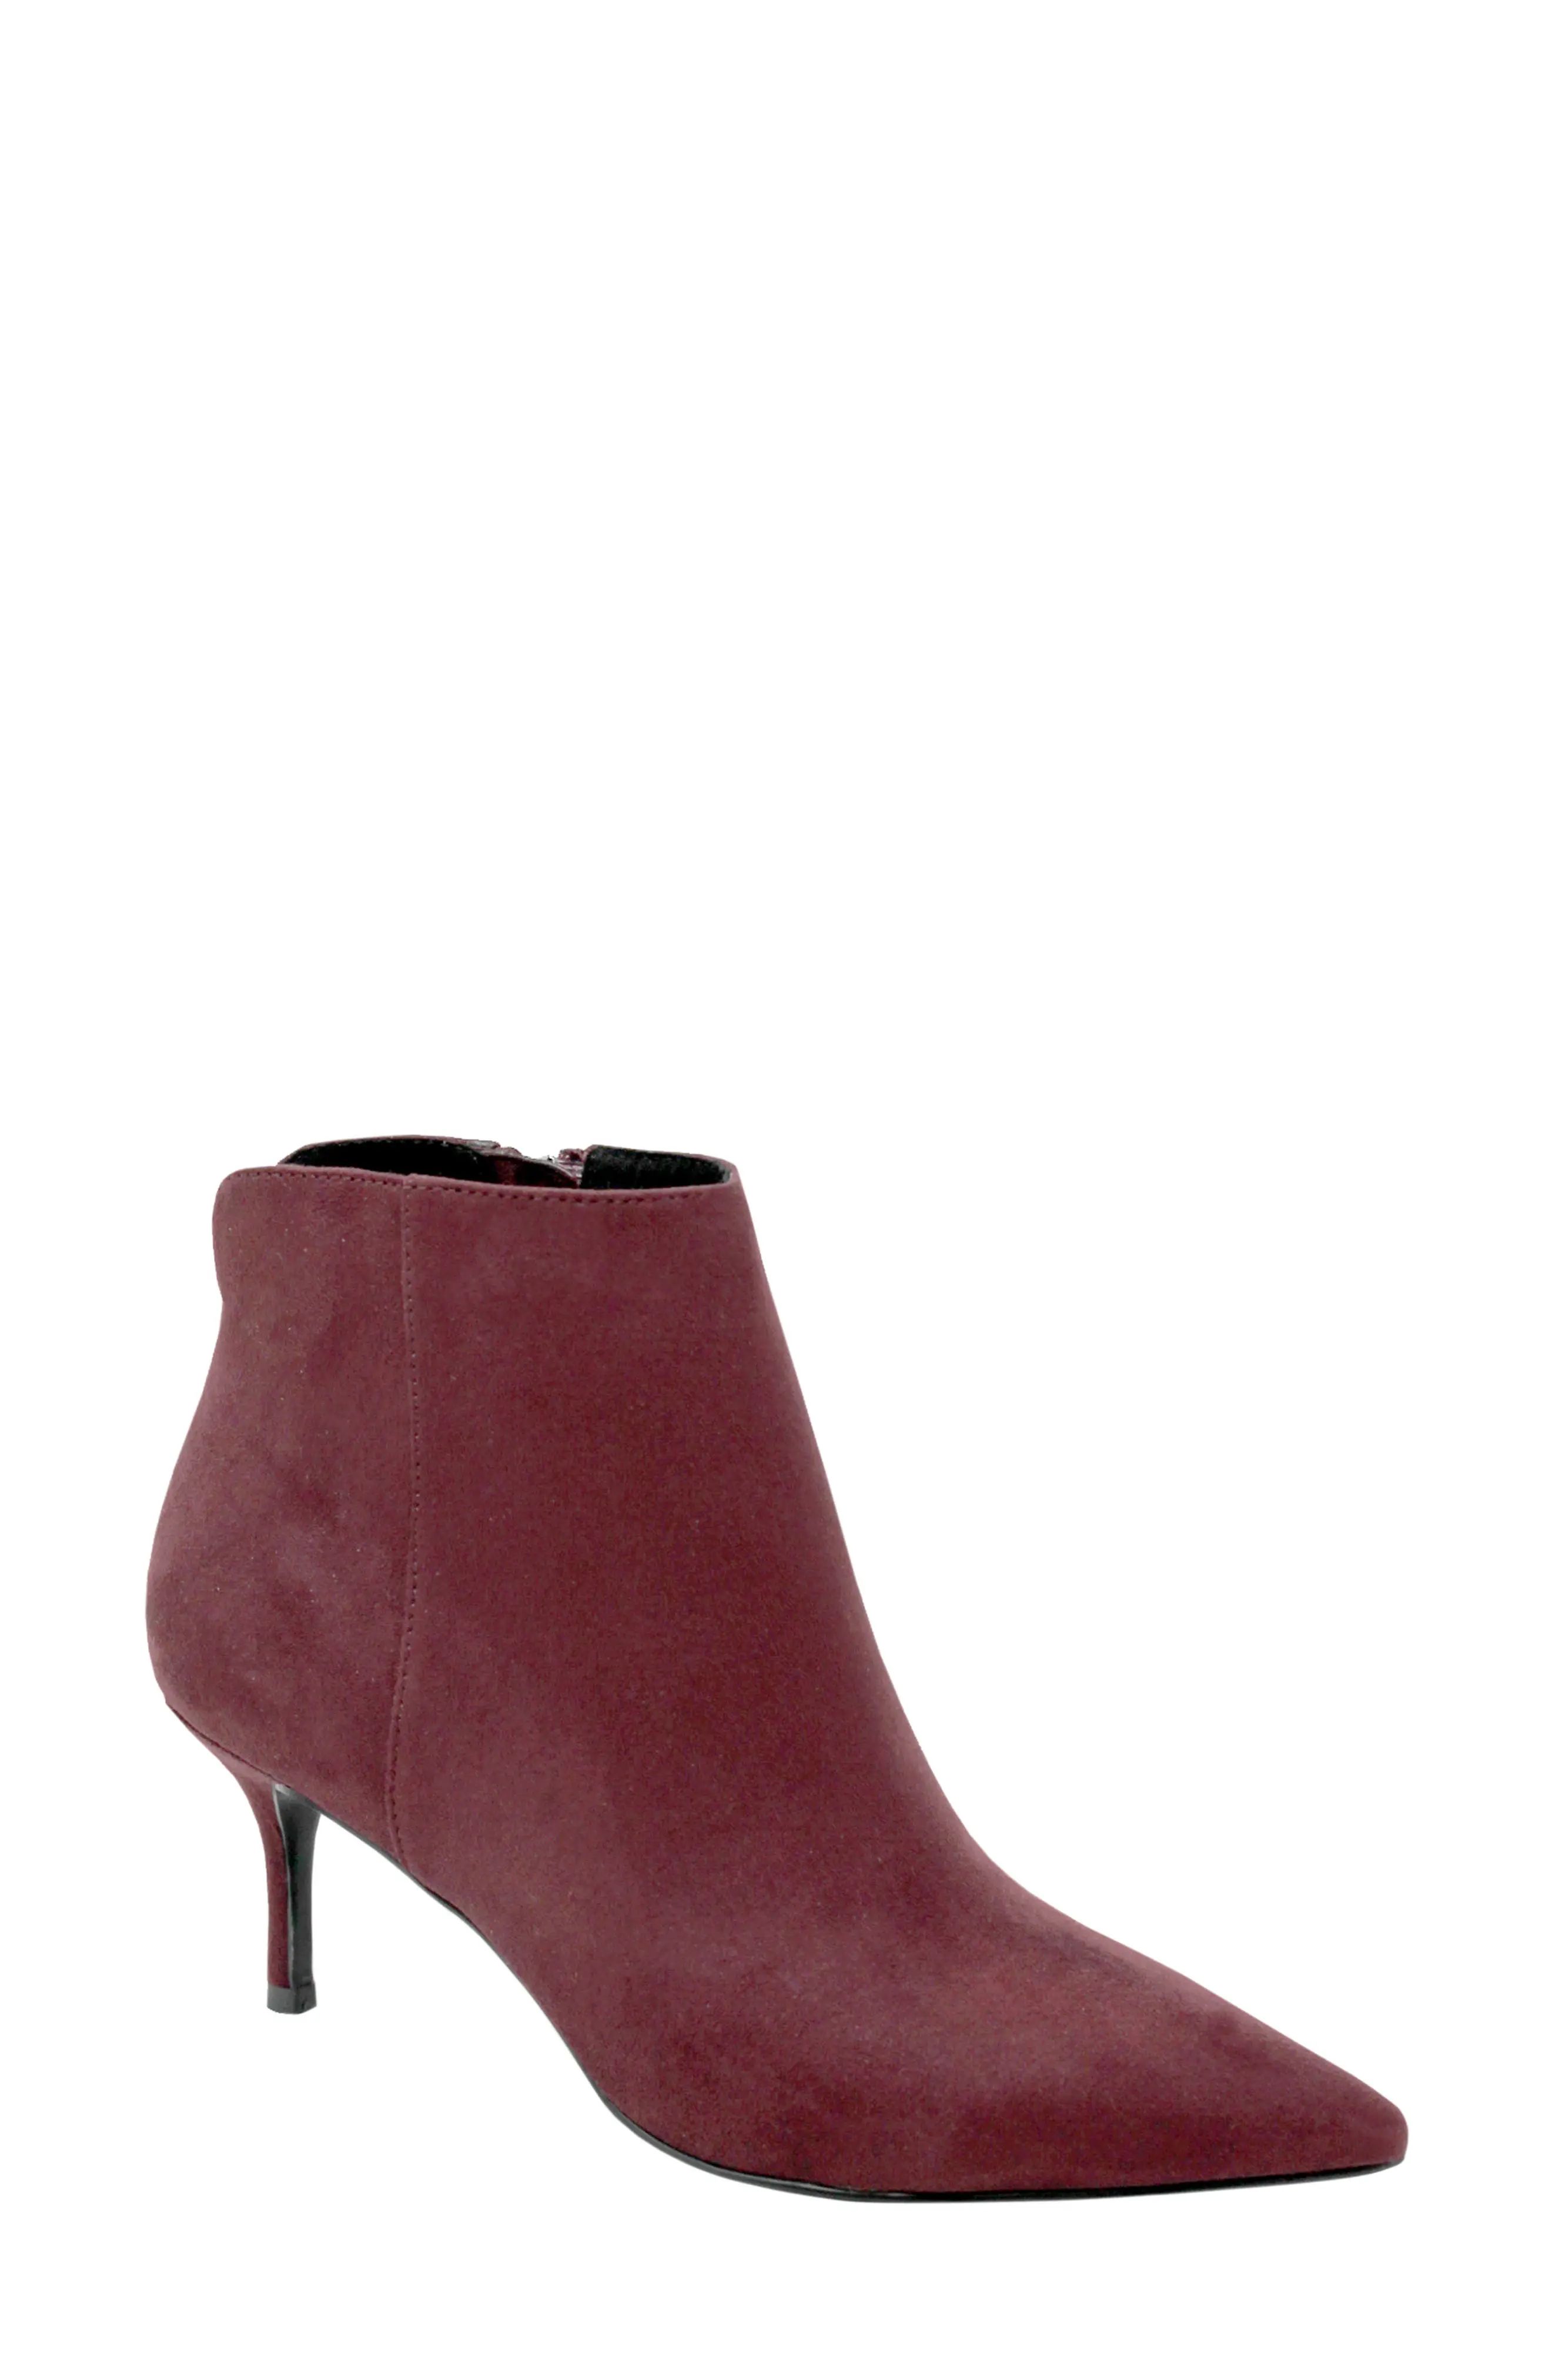 Women's Charles By Charles David Accurate Bootie, Size 6 M - Burgundy | Nordstrom